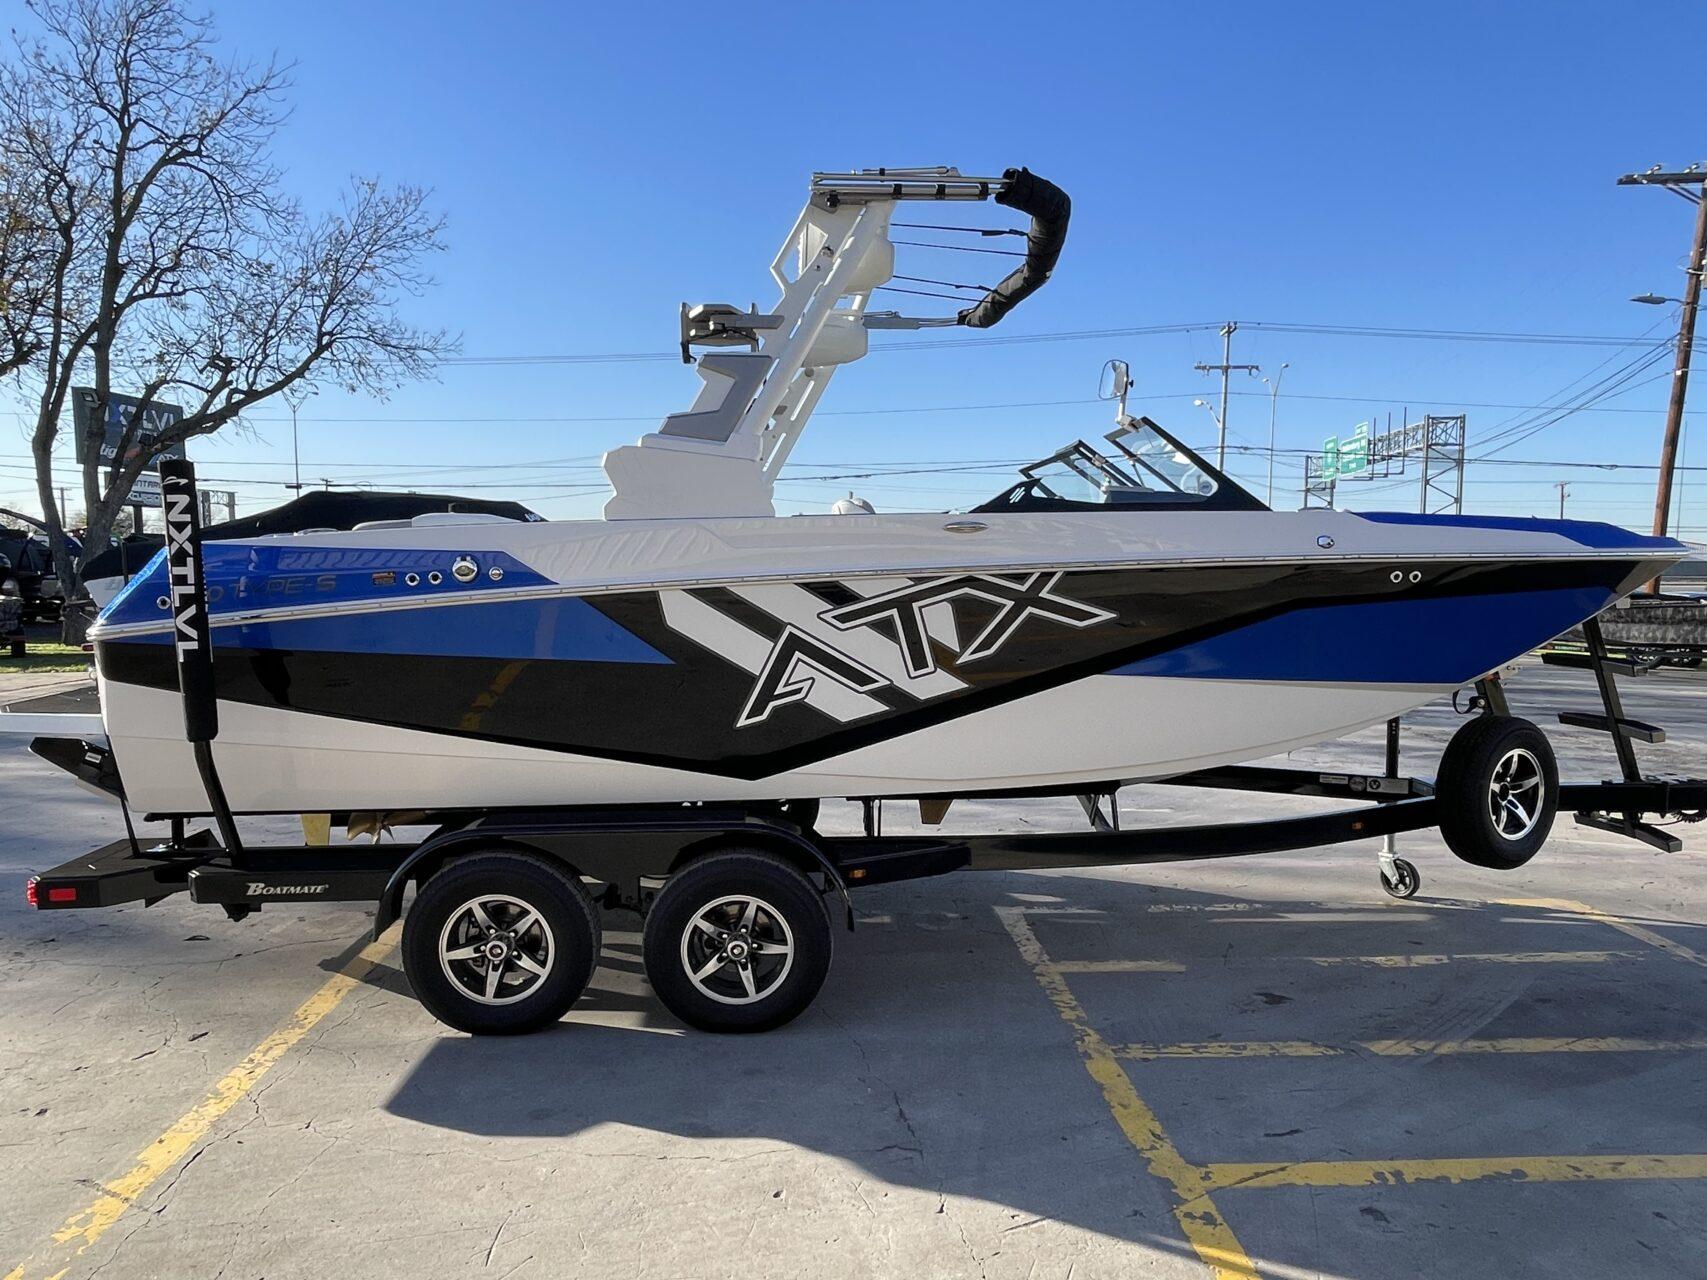 ATX Surf Boats 20 Type-S